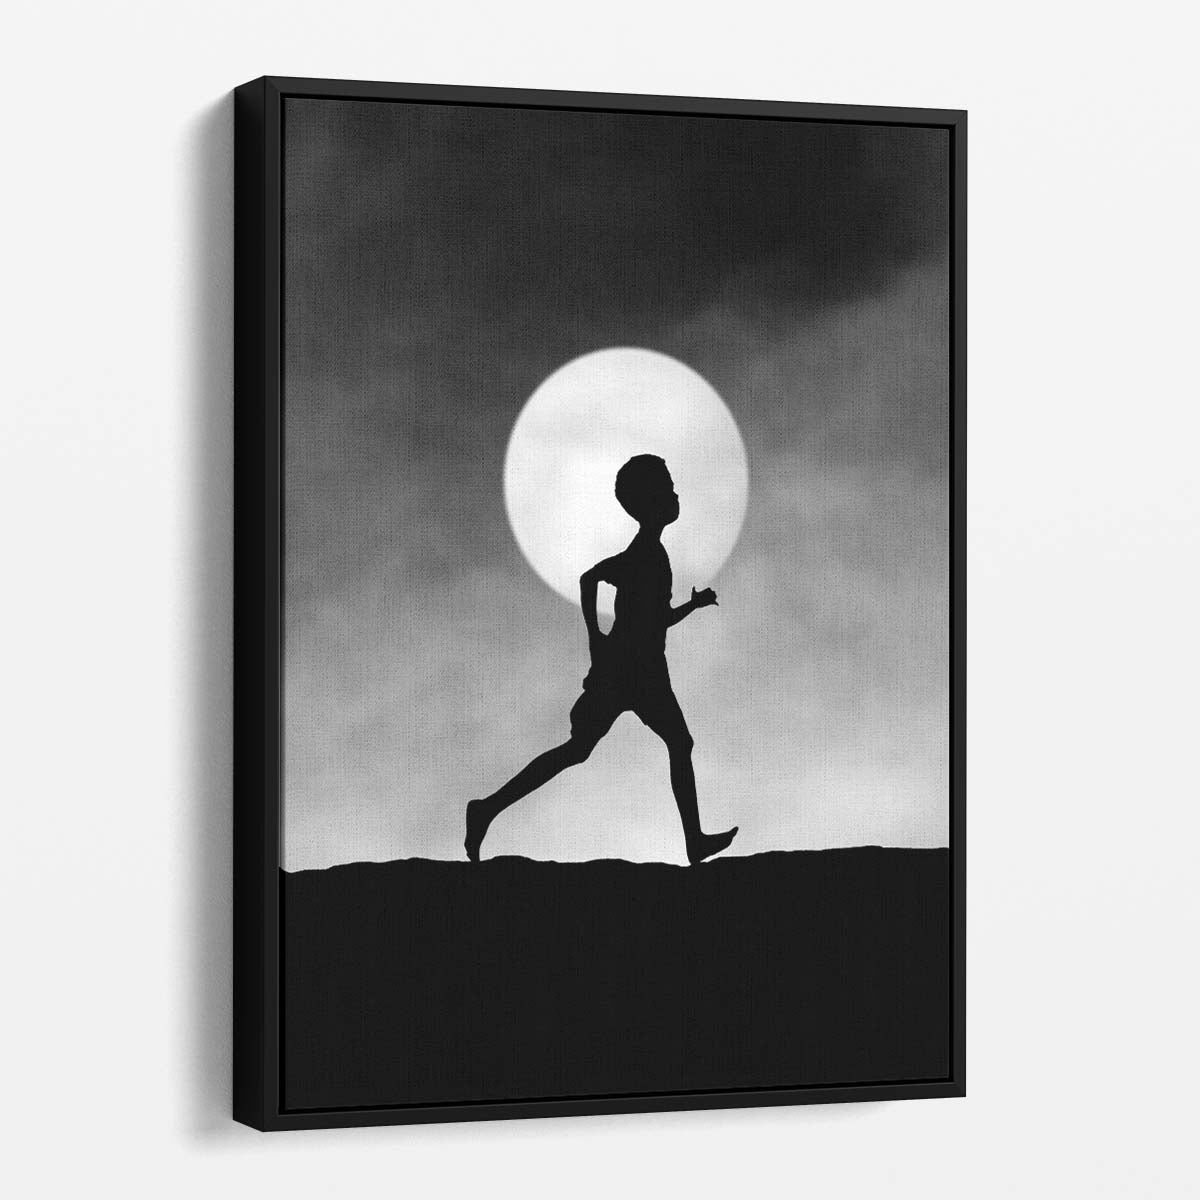 Surreal Monochrome Dream Catcher - Boy Silhouette Photography Art by Luxuriance Designs, made in USA